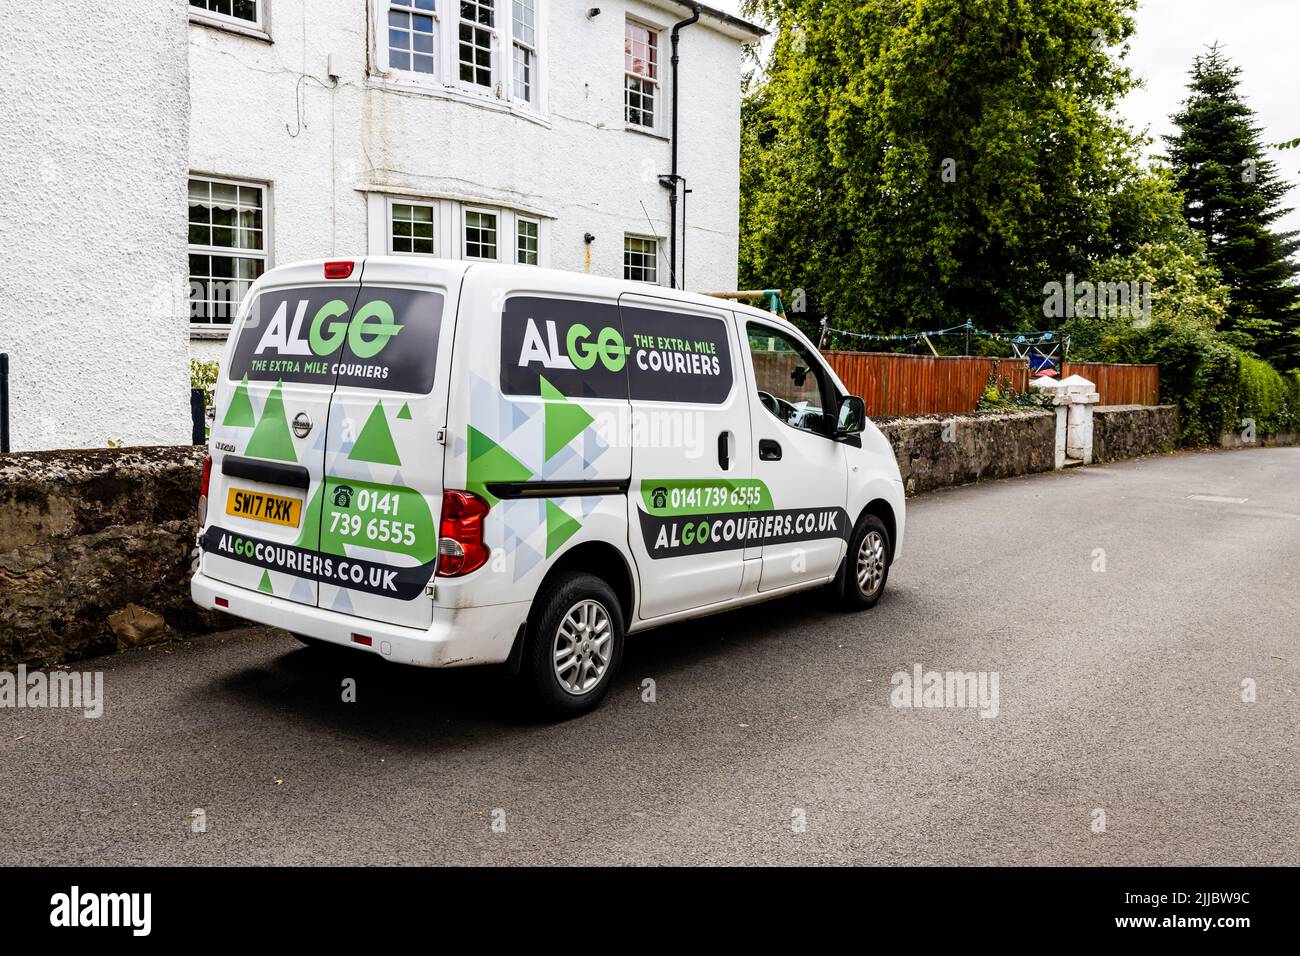 Exterior landscape view of Algo courier van with logos from the extra mile couriers parked outside a residential dwelling, with no people visible Stock Photo